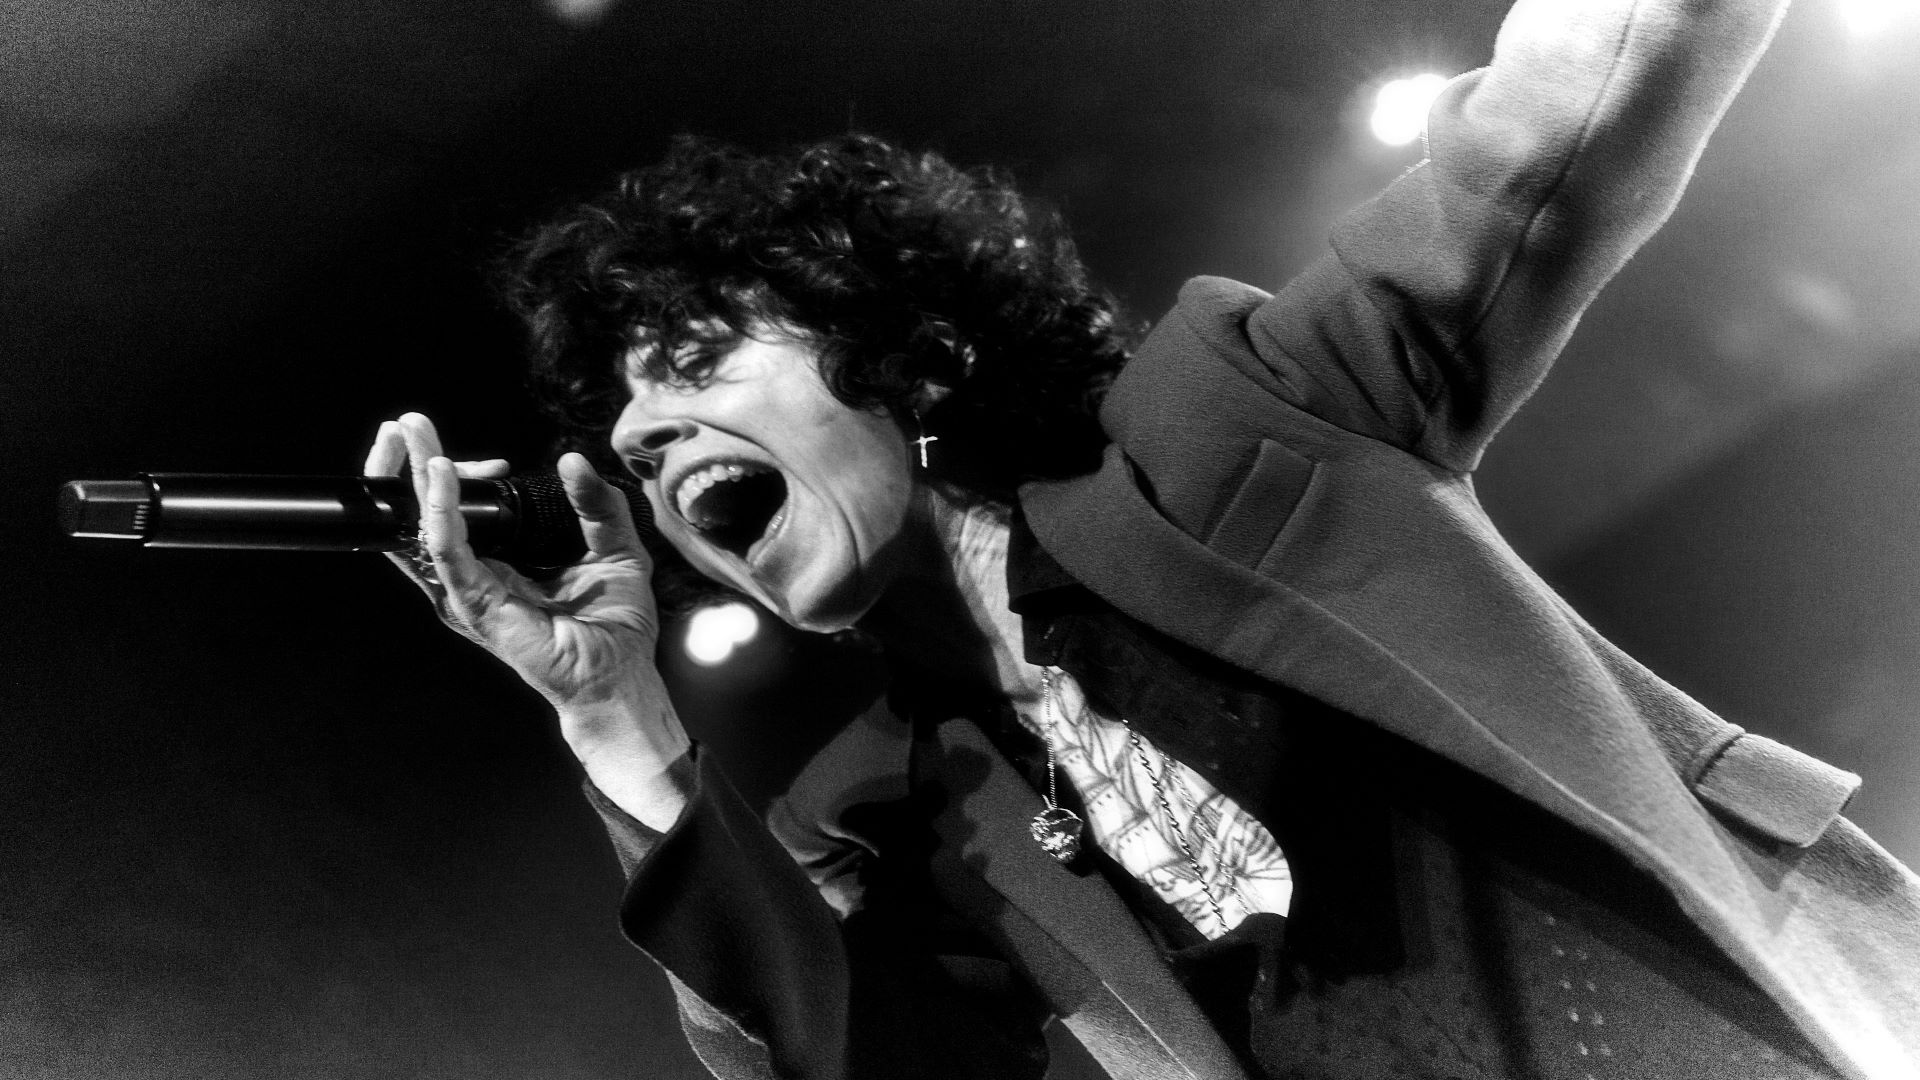 Gallery: LP Dazzles At Sold Out Phoenix Show